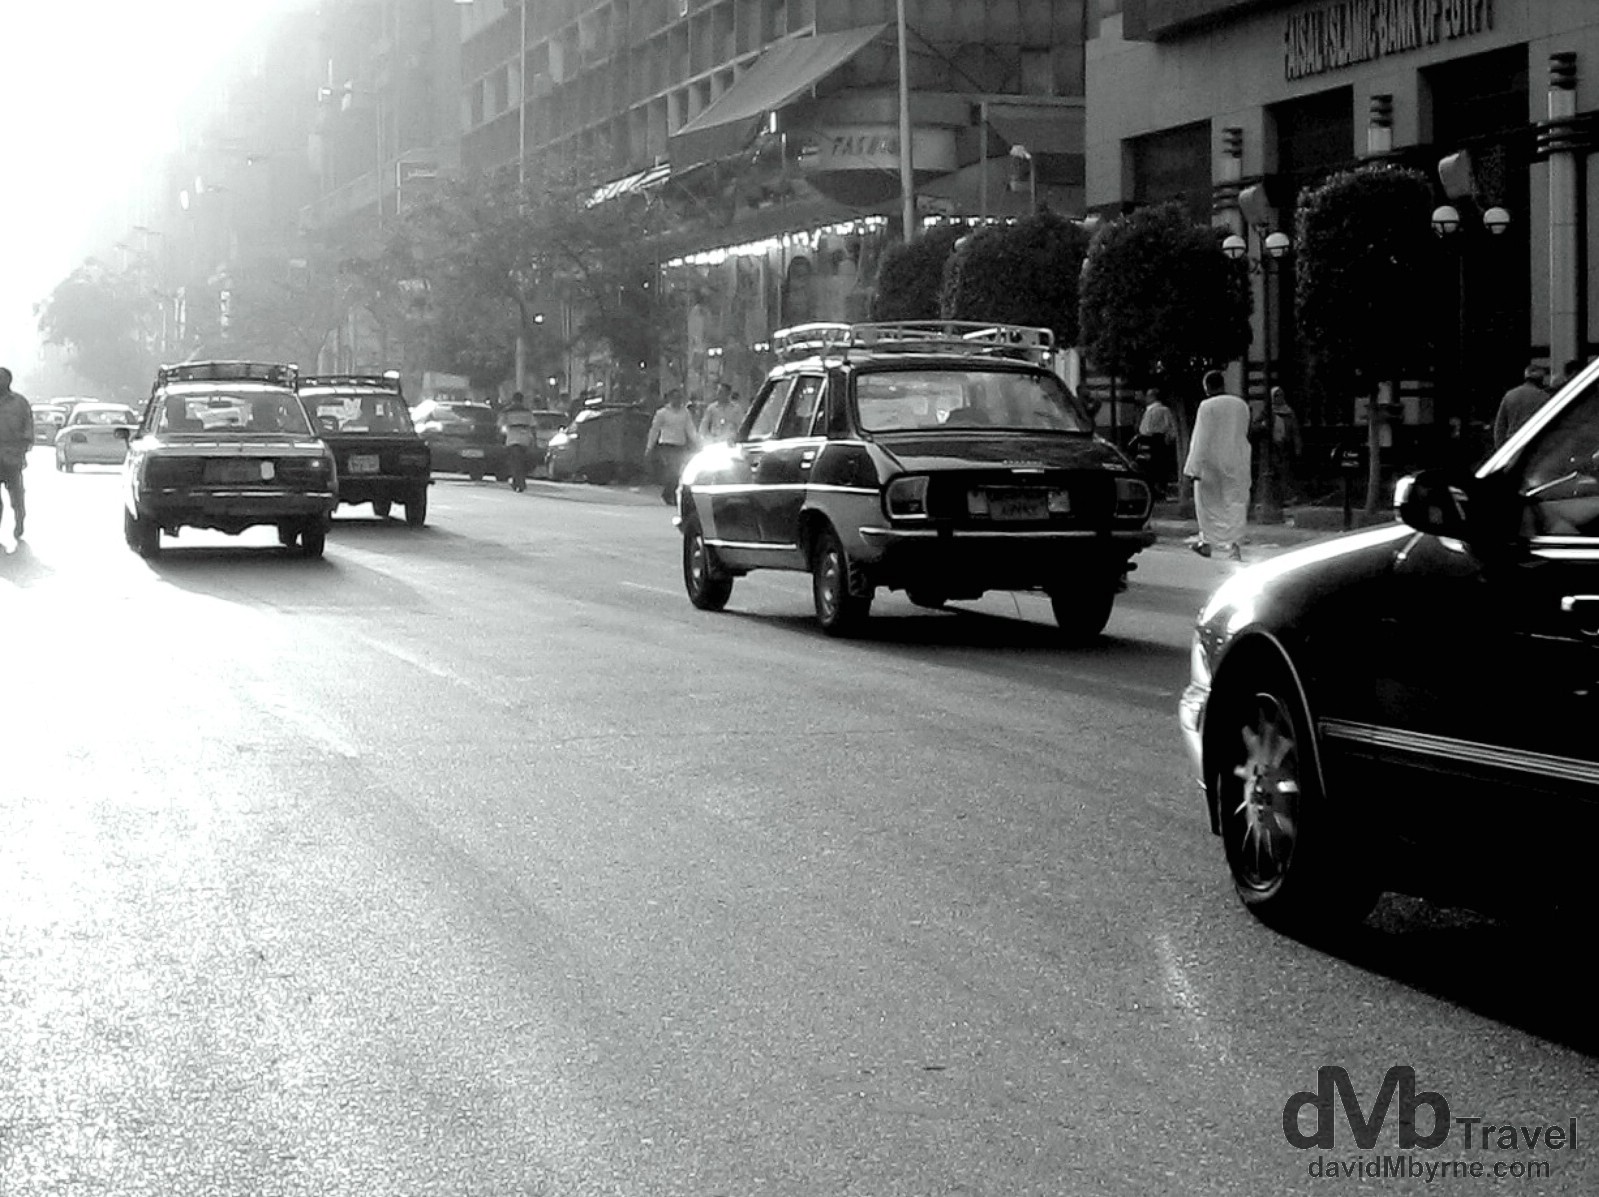 Late afternoon traffic on 26th of July street, Downtown Cairo, Egypt. April 10, 2008.